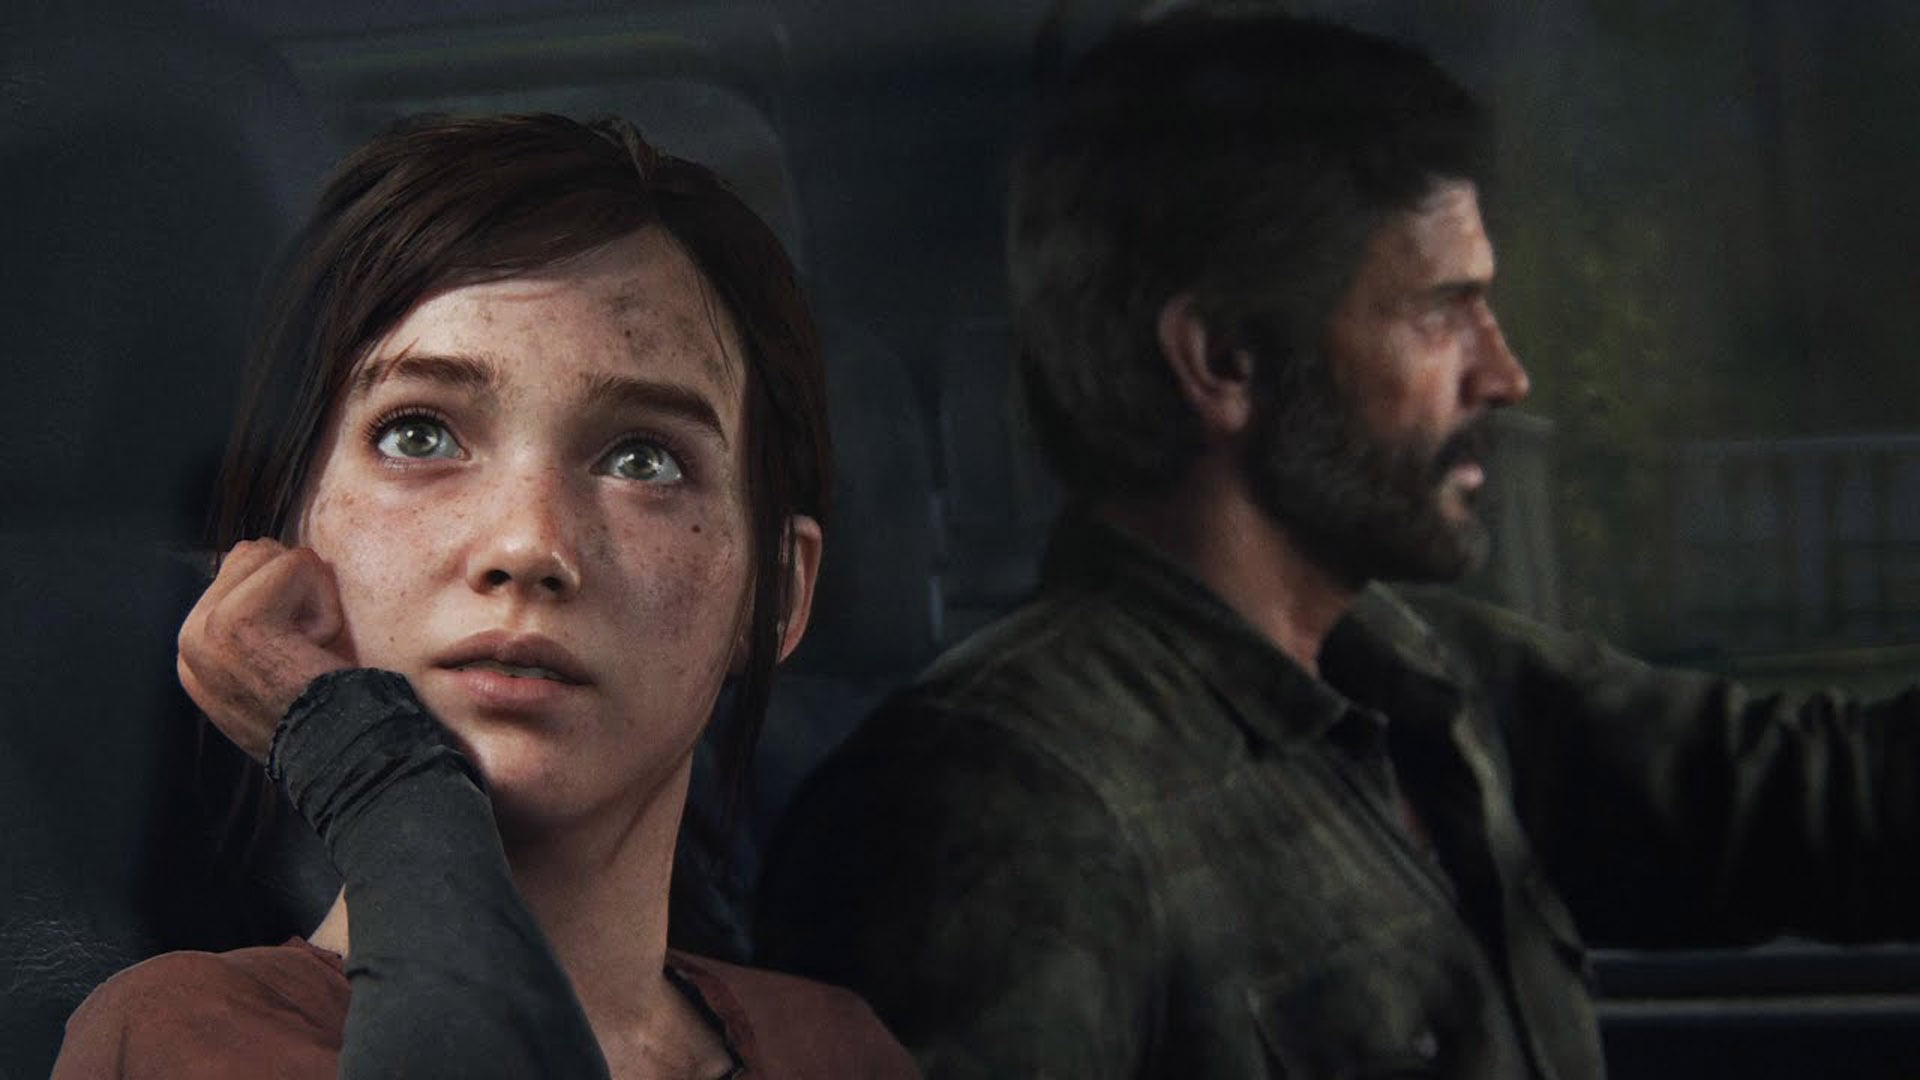 Dramatic scene from The Last of Us Part 1 featuring main characters